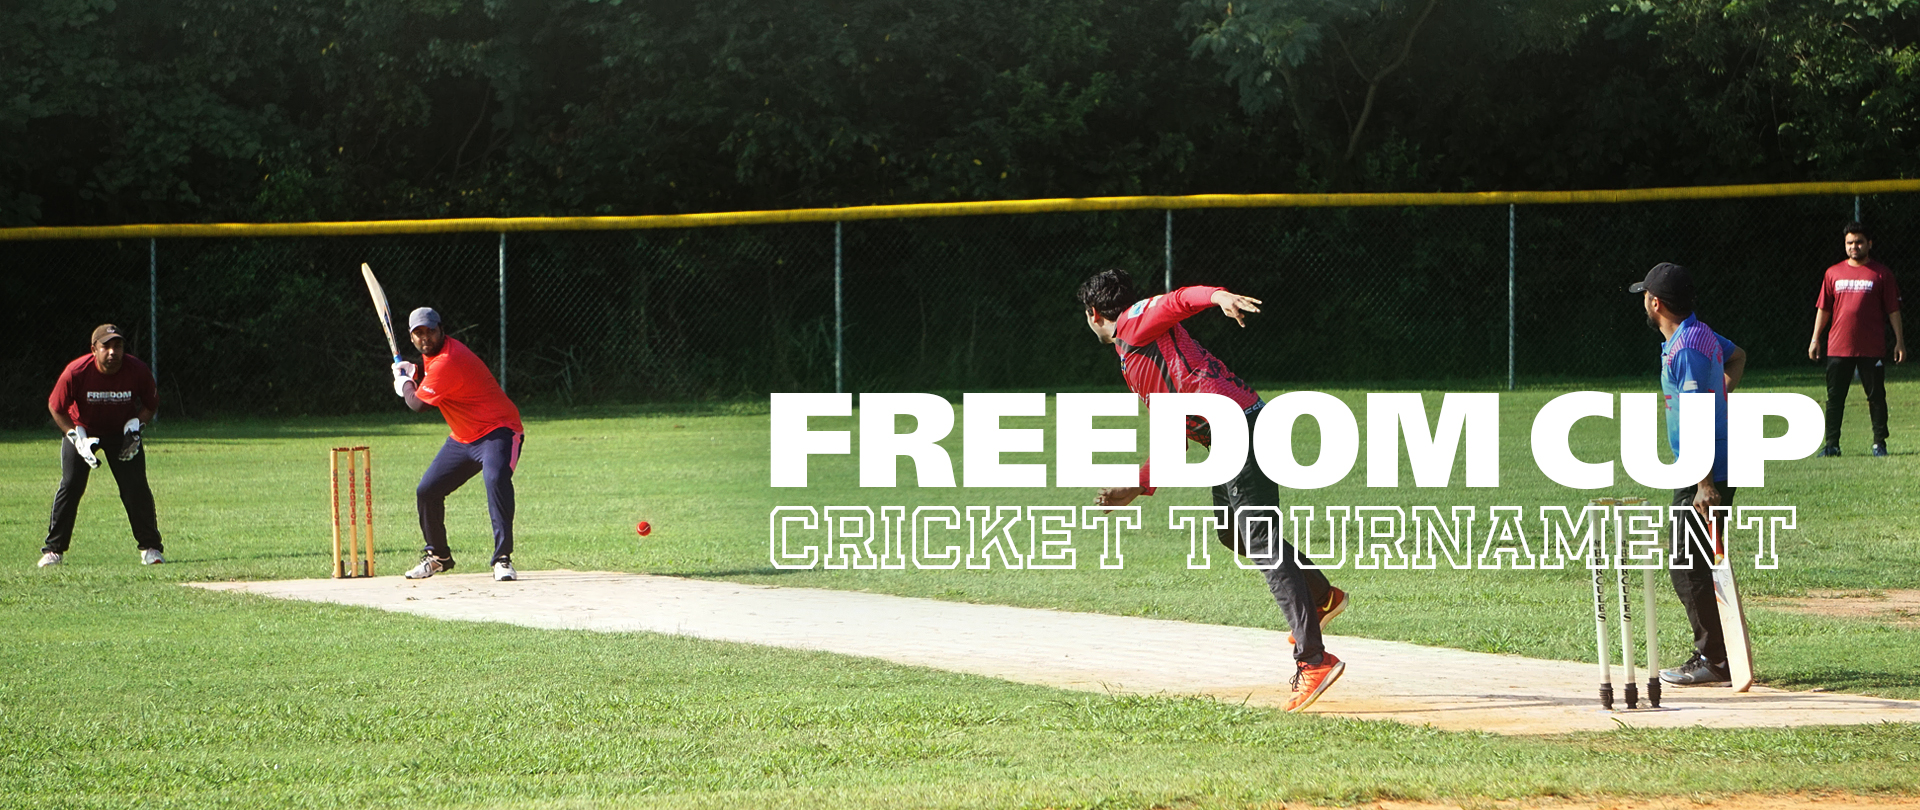 Freedom Cup Cricket
Saturdays, July 13 – August 17
Community Teams Register Here!
